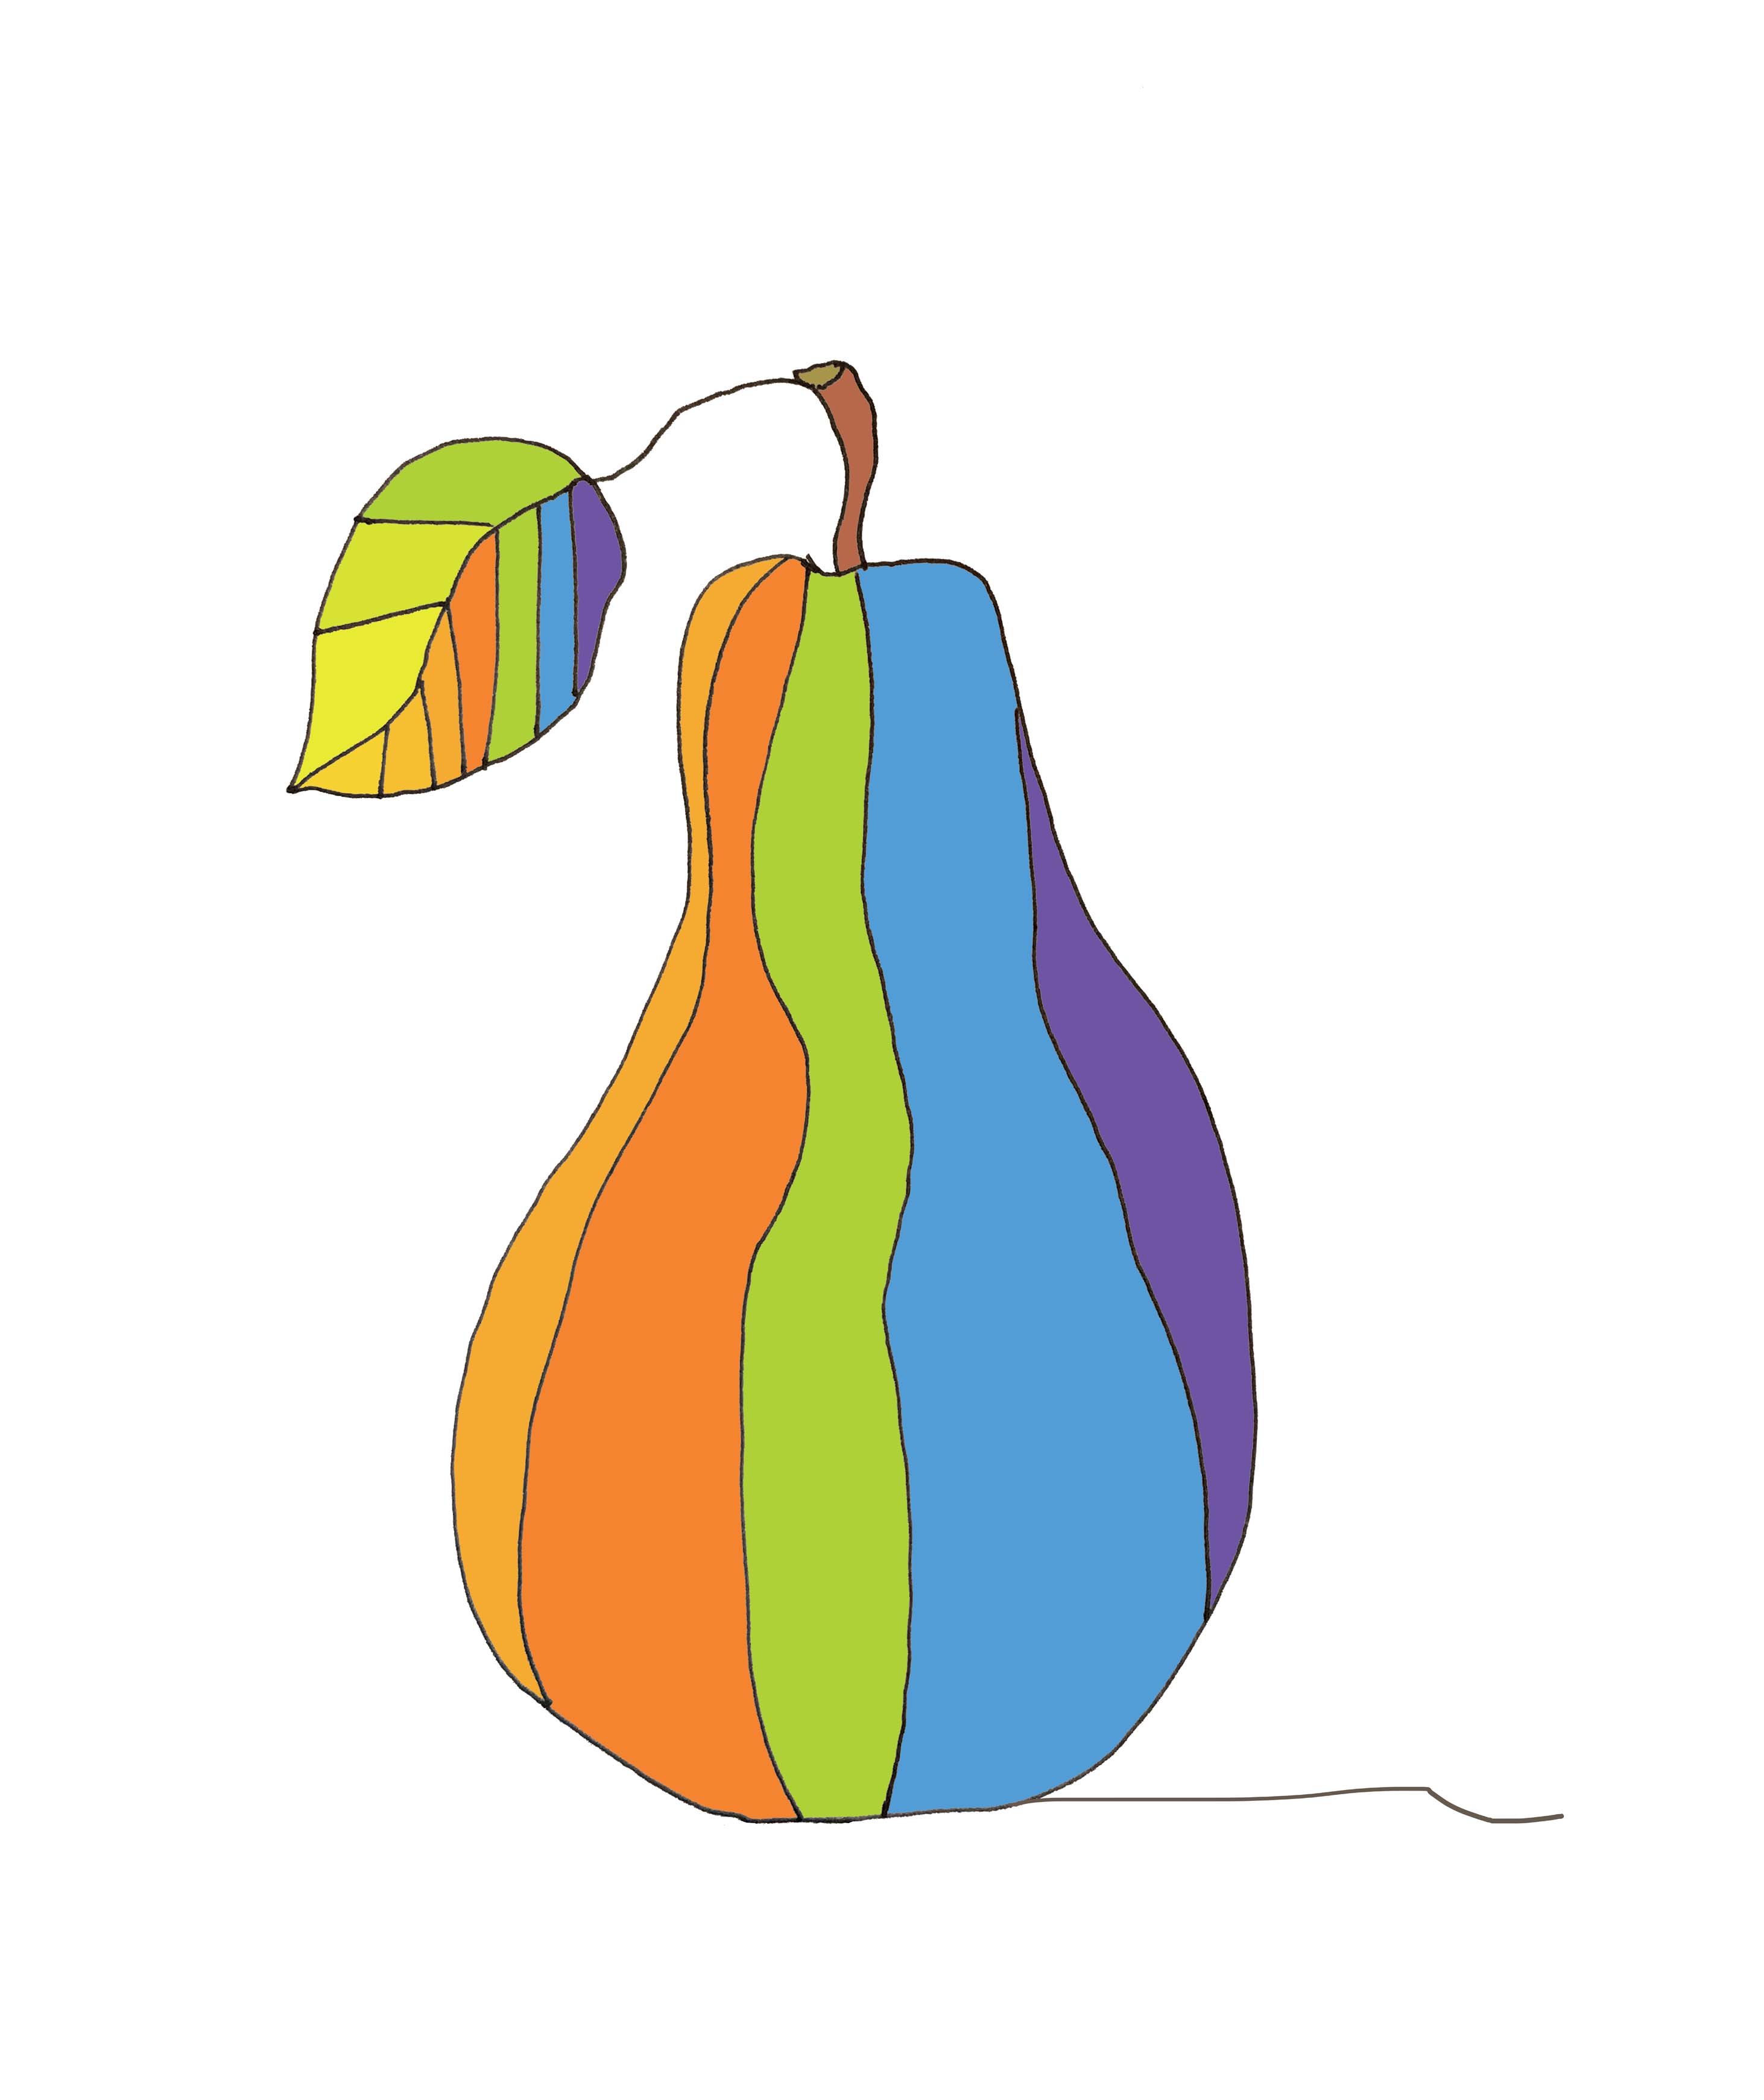 art every day number 252 / illustration / pear orange green 